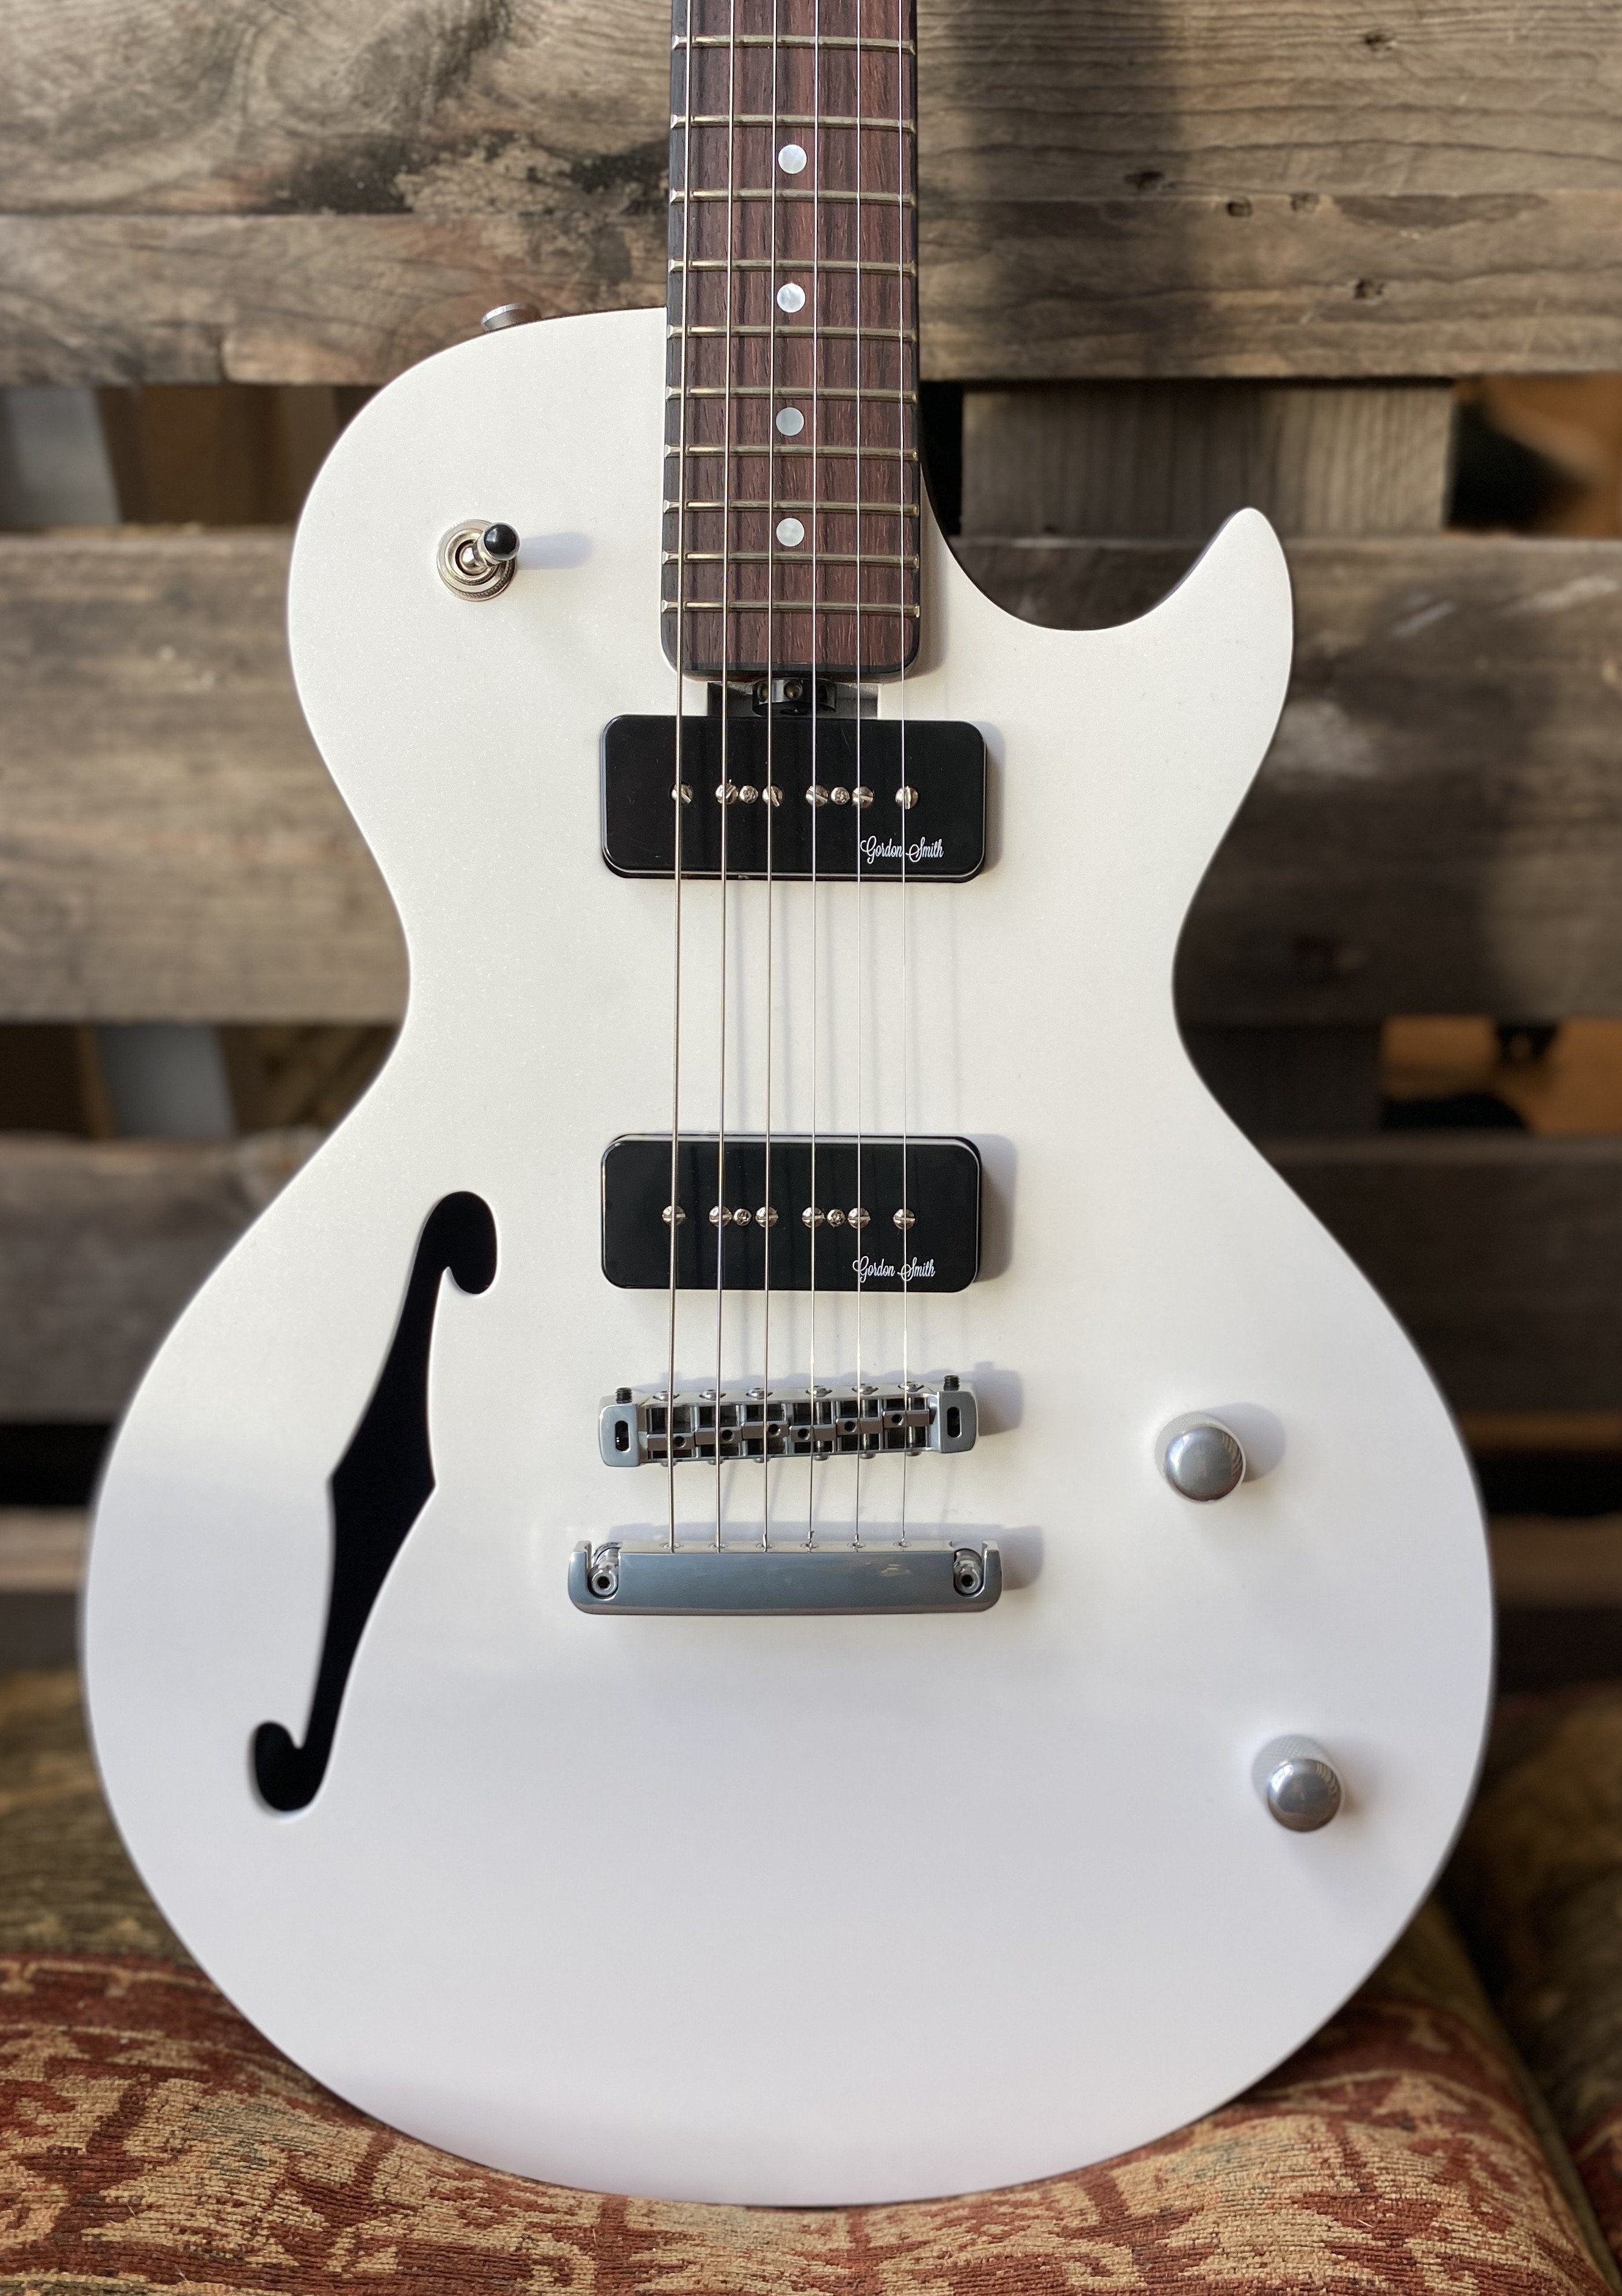 Gordon Smith Deluxe Export Semi Hollow Champagne 2 X P90., Electric Guitar for sale at Richards Guitars.